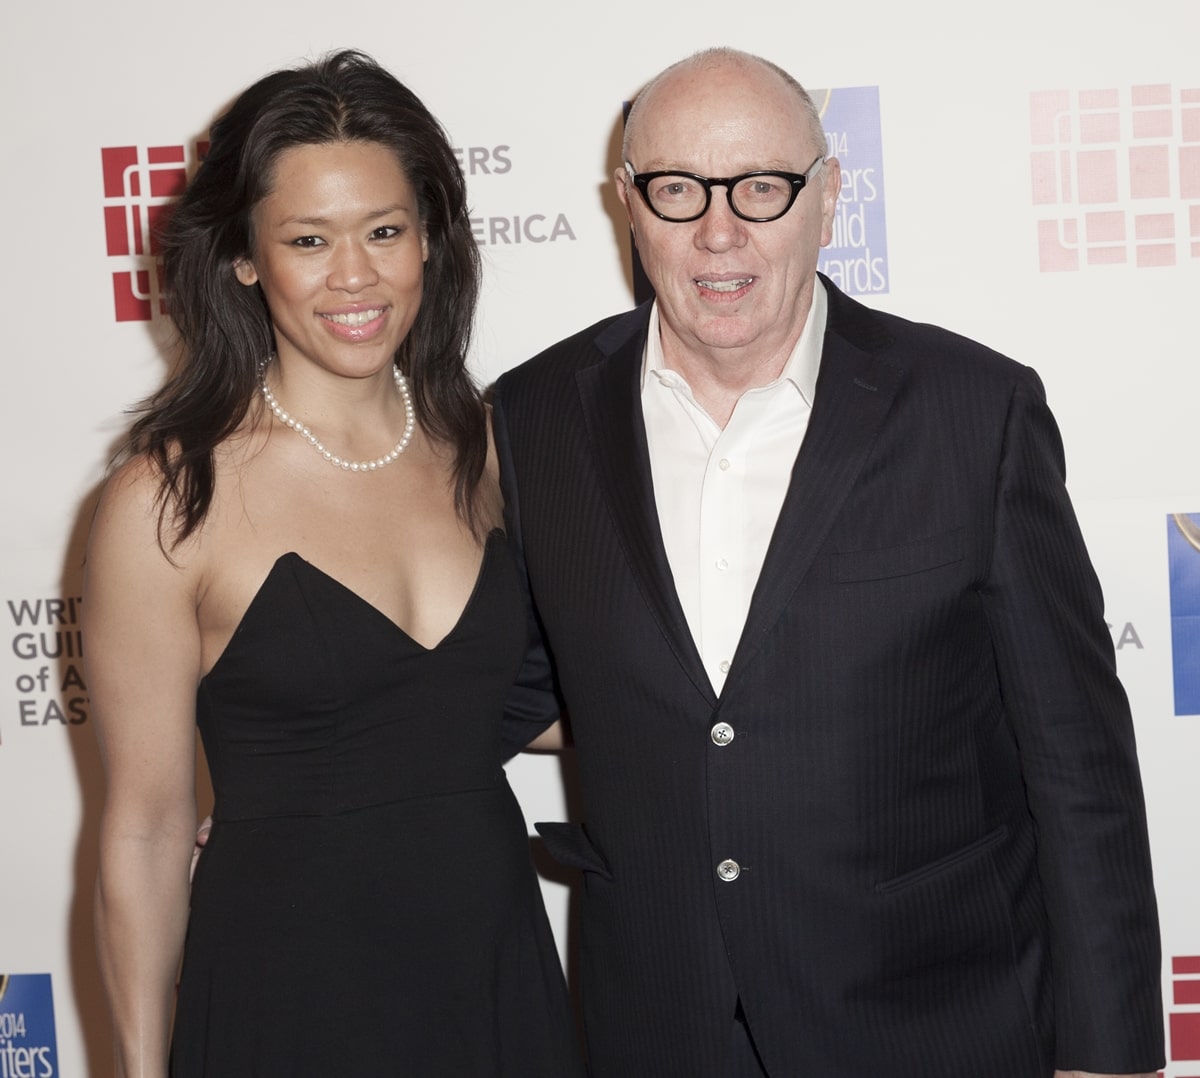 Writer Terry George (R) and Tiffany Chen attend the 66th Annual Writers Guild Awards East Coast Ceremony